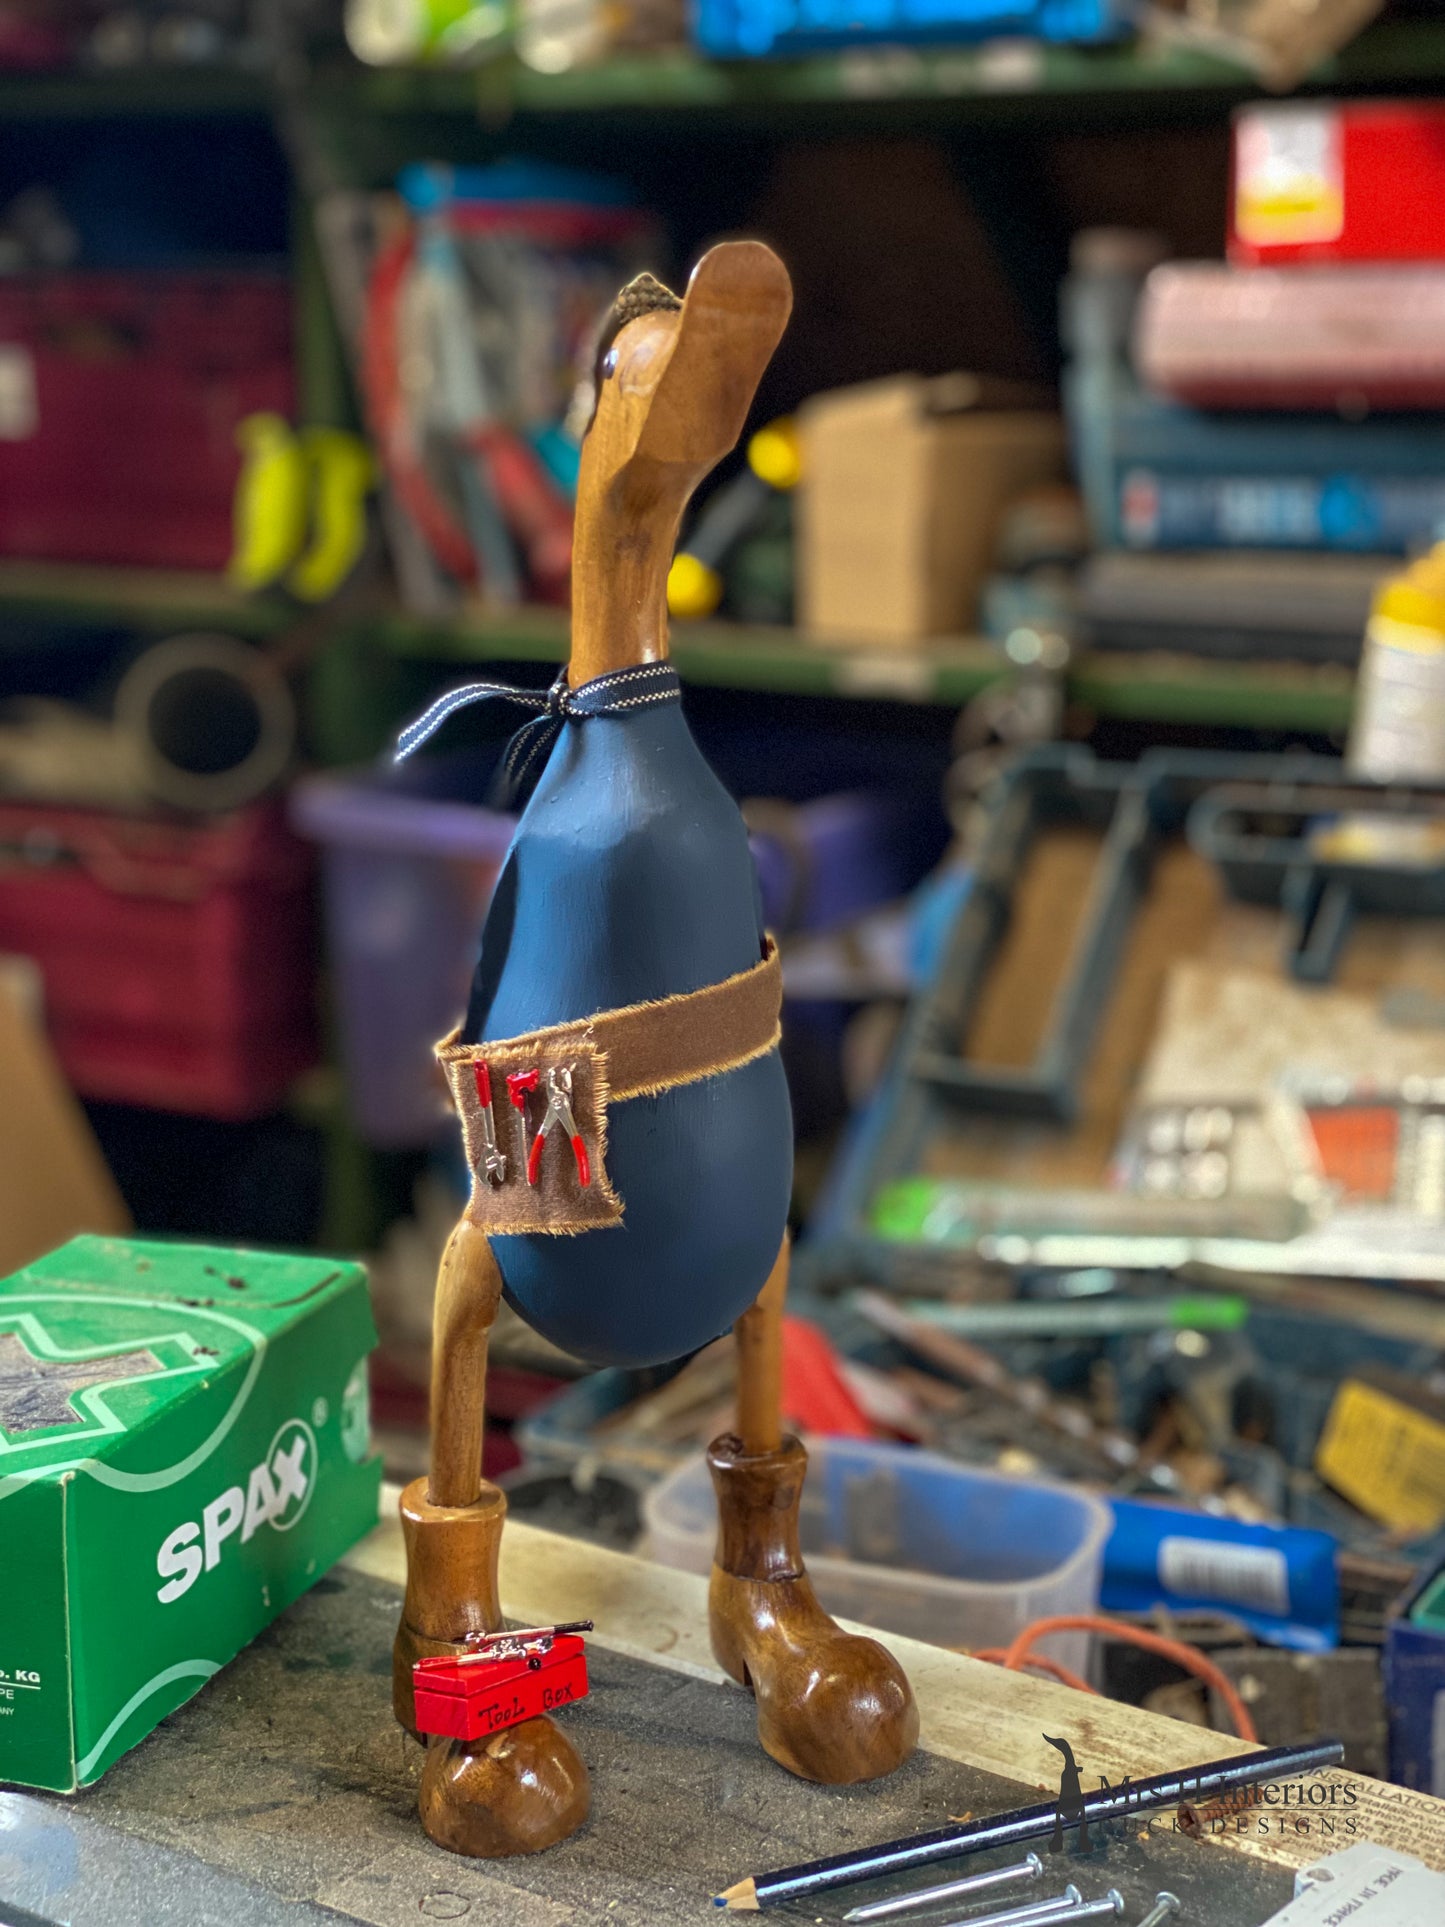 Tool man Ted - Decorated Wooden Duck in Boots by Mrs H the Duck Lady